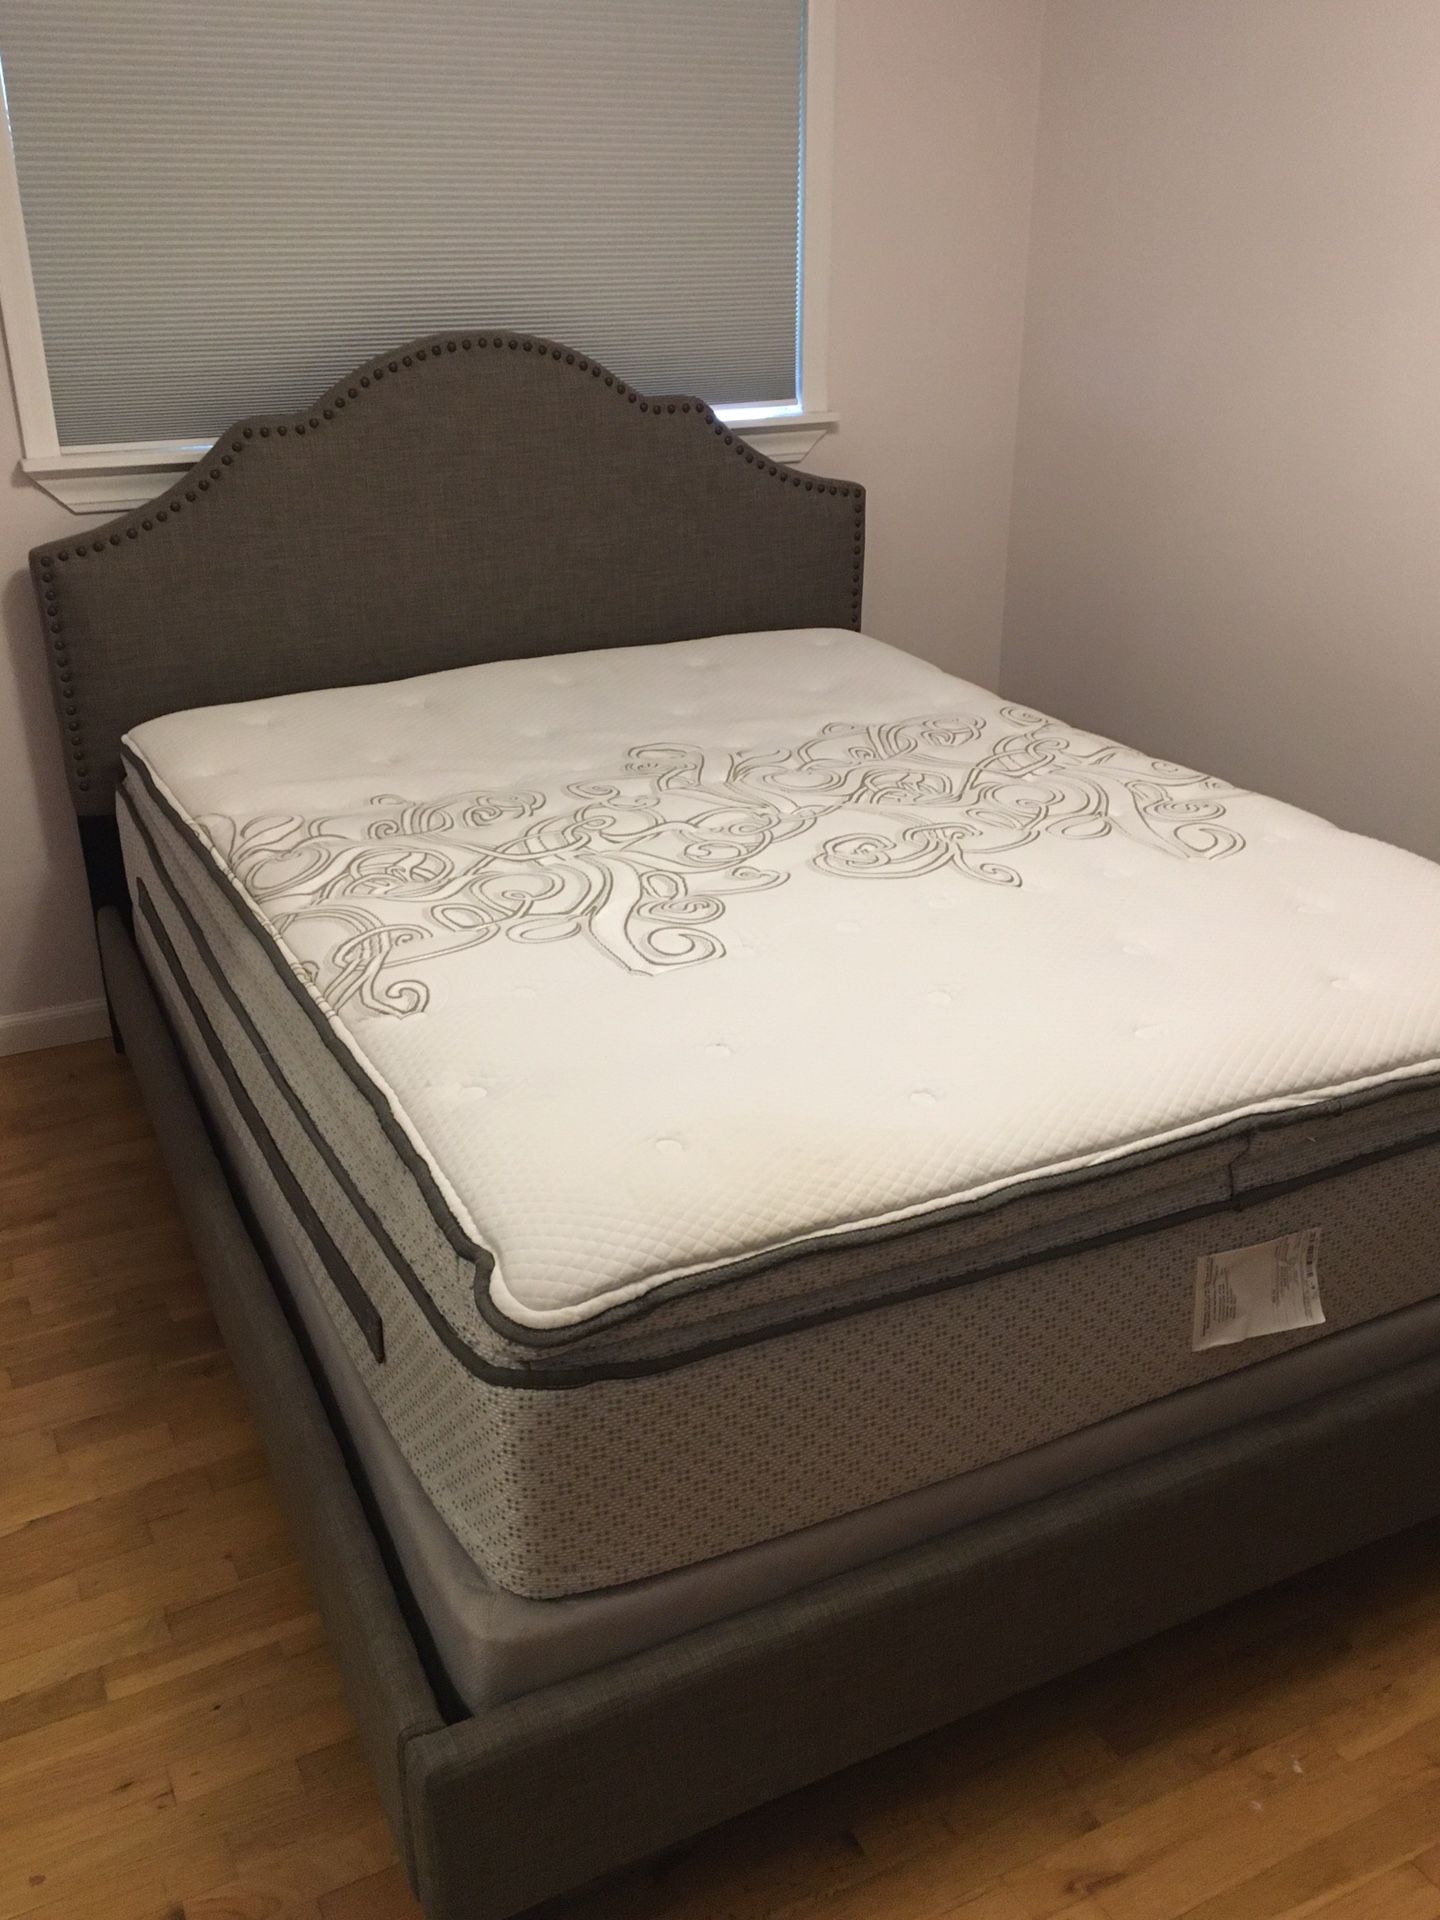 Queen bed set with Costco padded headboard frame